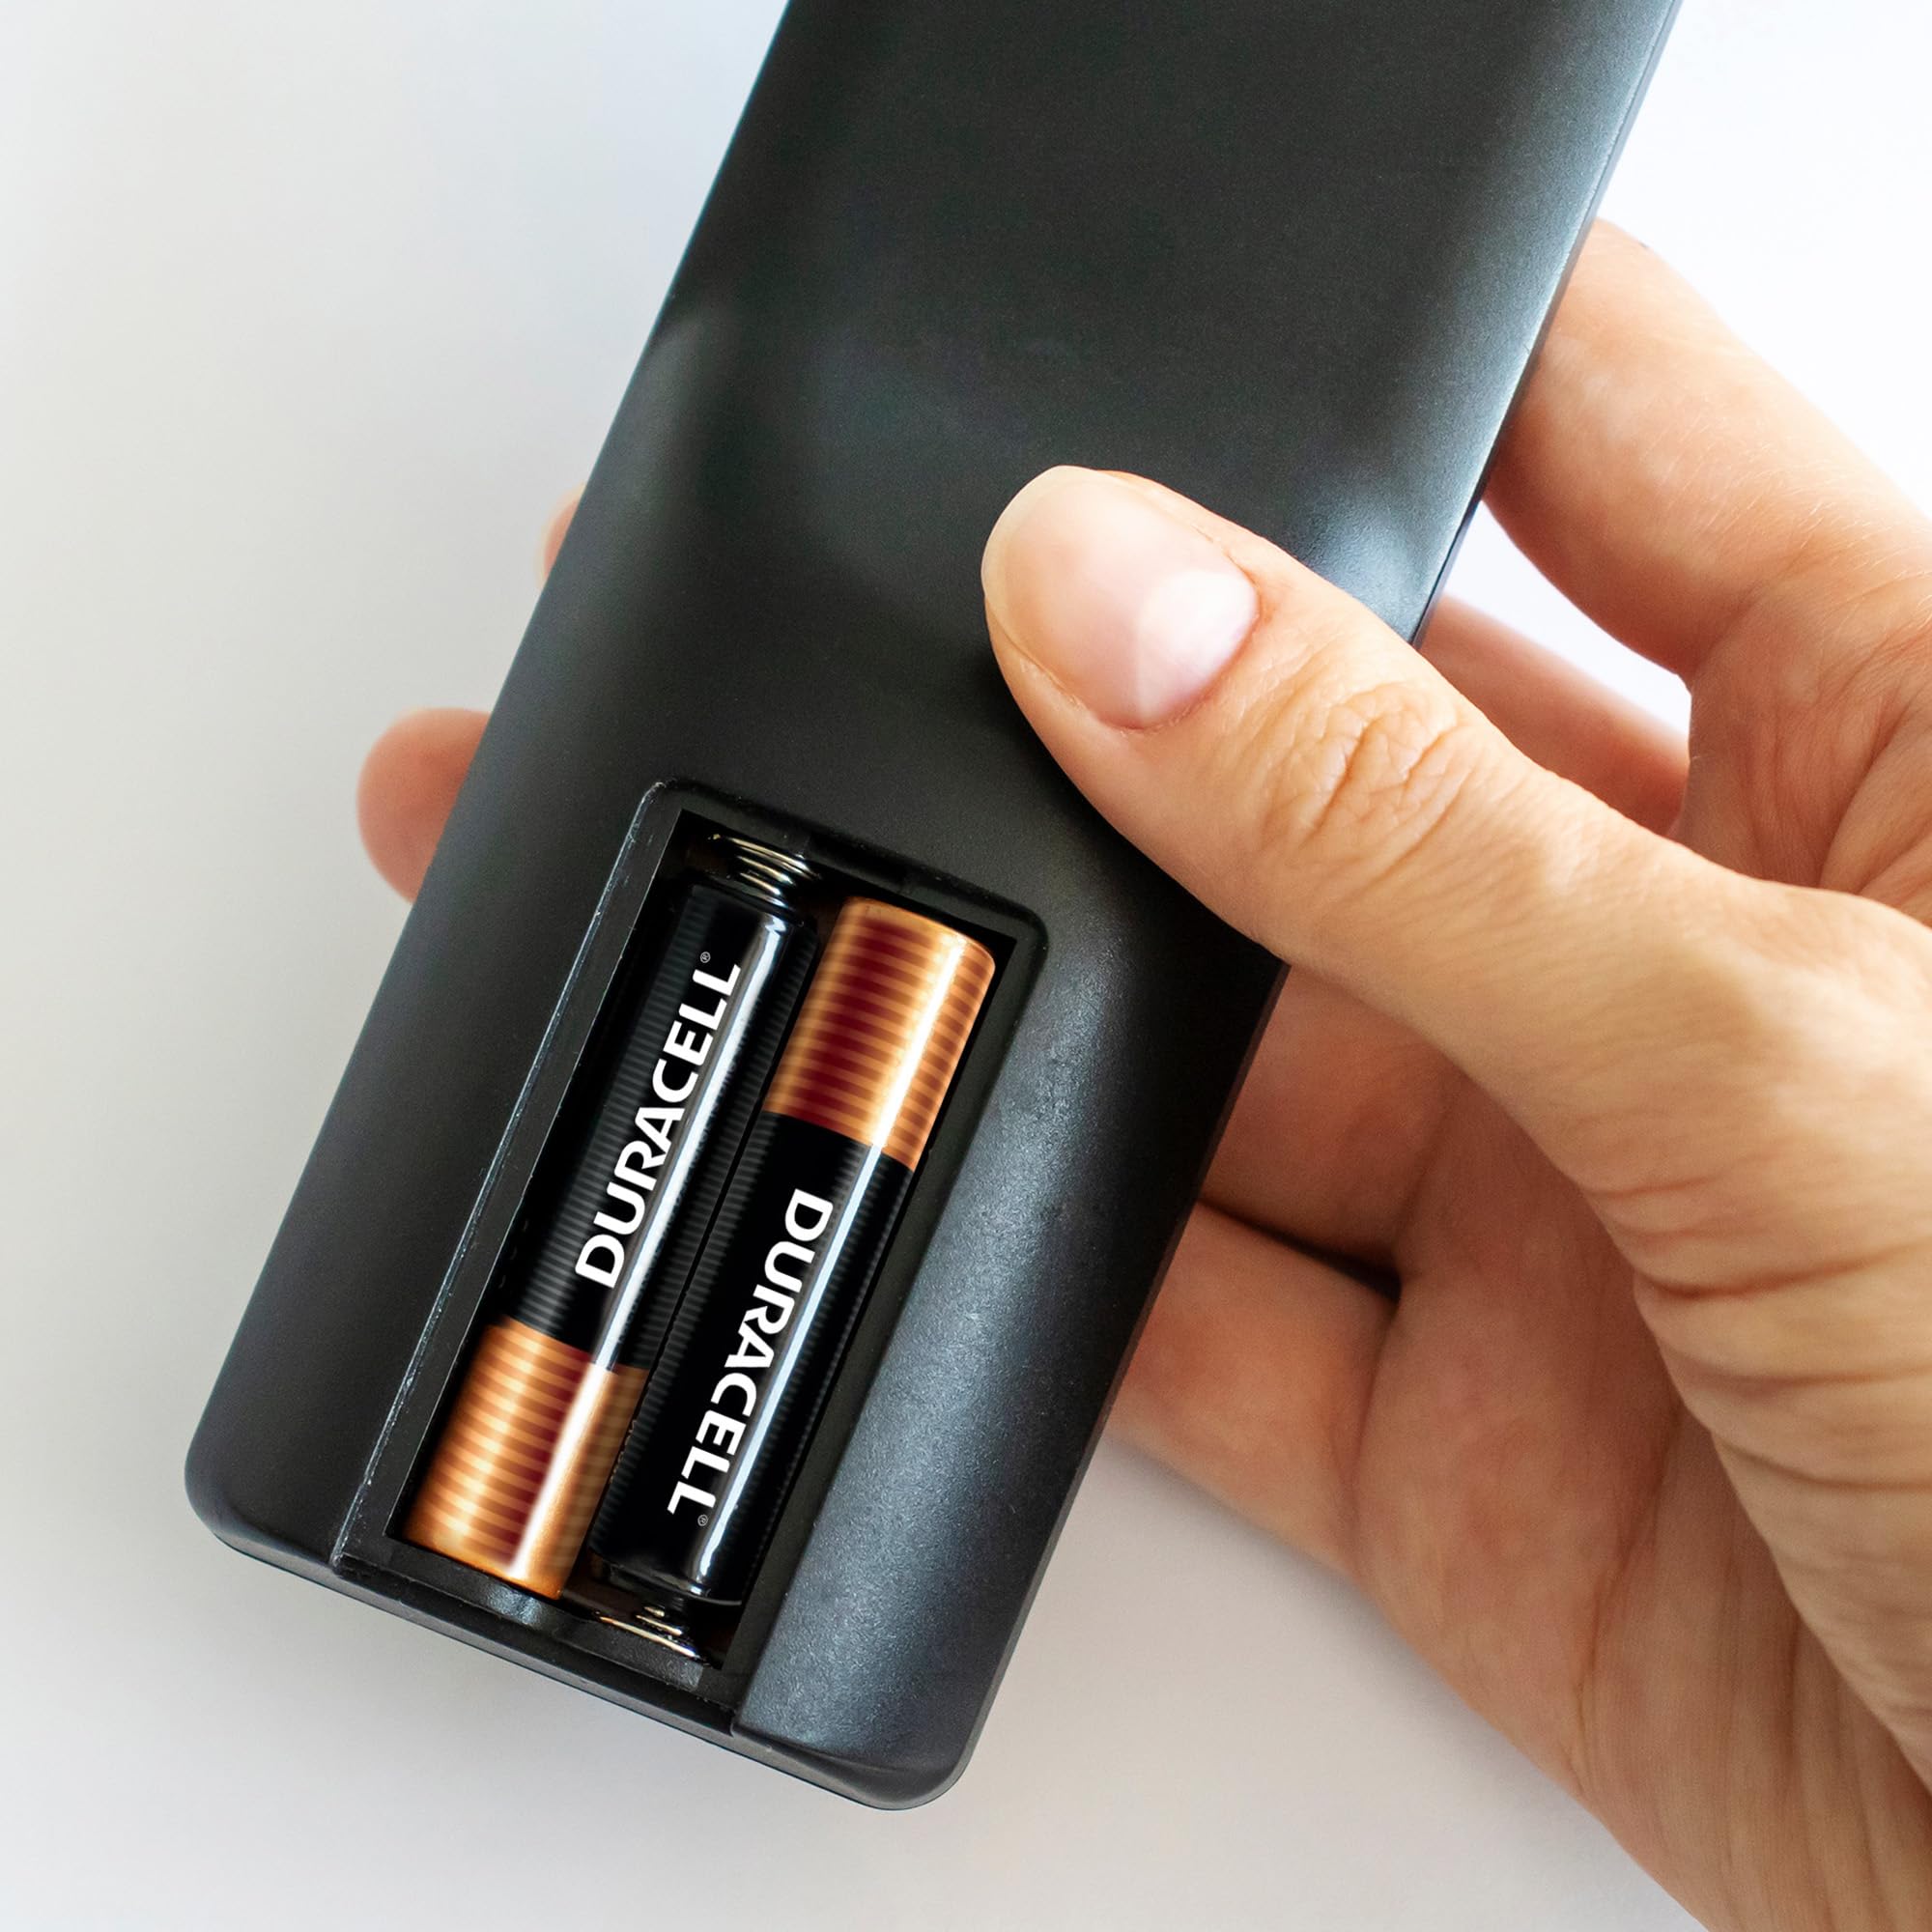 DURACELL Duralock AA 1.5 Volt Alkaline Battery Pack to Charge Items for Exclusive Power in Remotes and Controllers, (5 Packs of 20 Batteries Each)